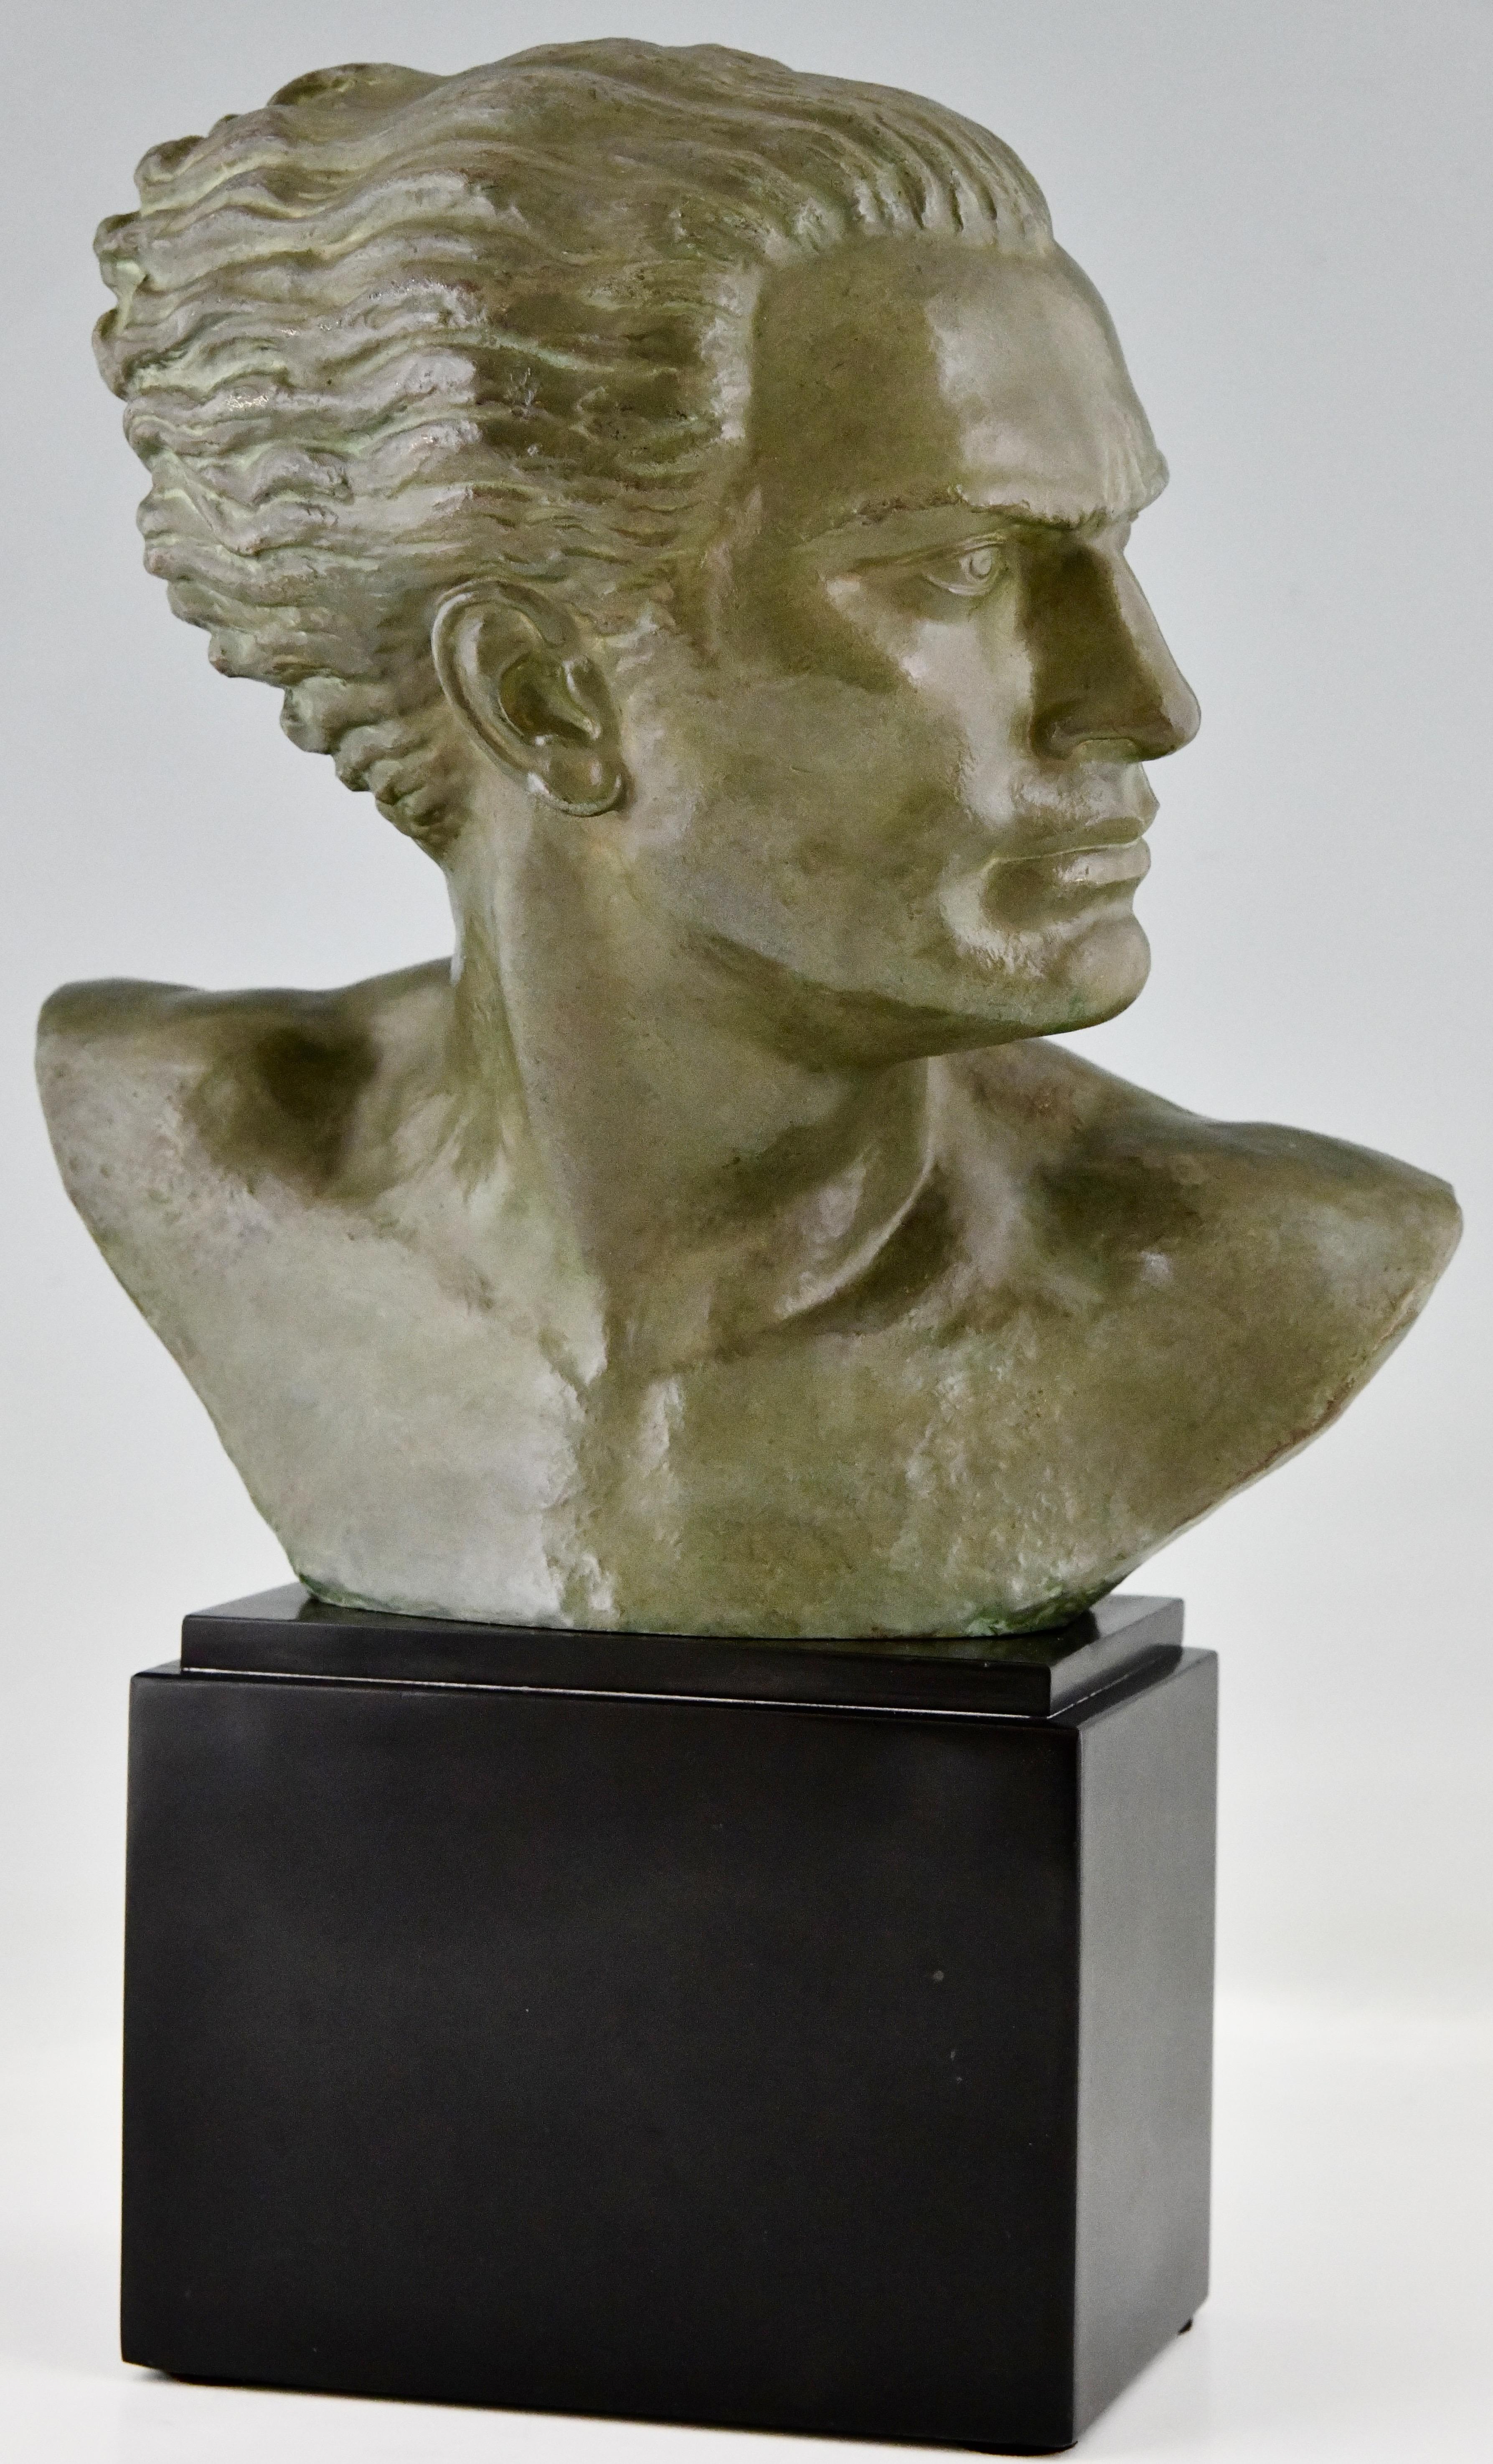 Art Deco bronze sculpture male bust of the aviator Jean Mermoz by Alfred Gilbert 1854-1934. The sculpture has a lovely green patina and stands on a belgian black marble base. France 1925.
This bronze is illustrated in Bronzes, sculptors and